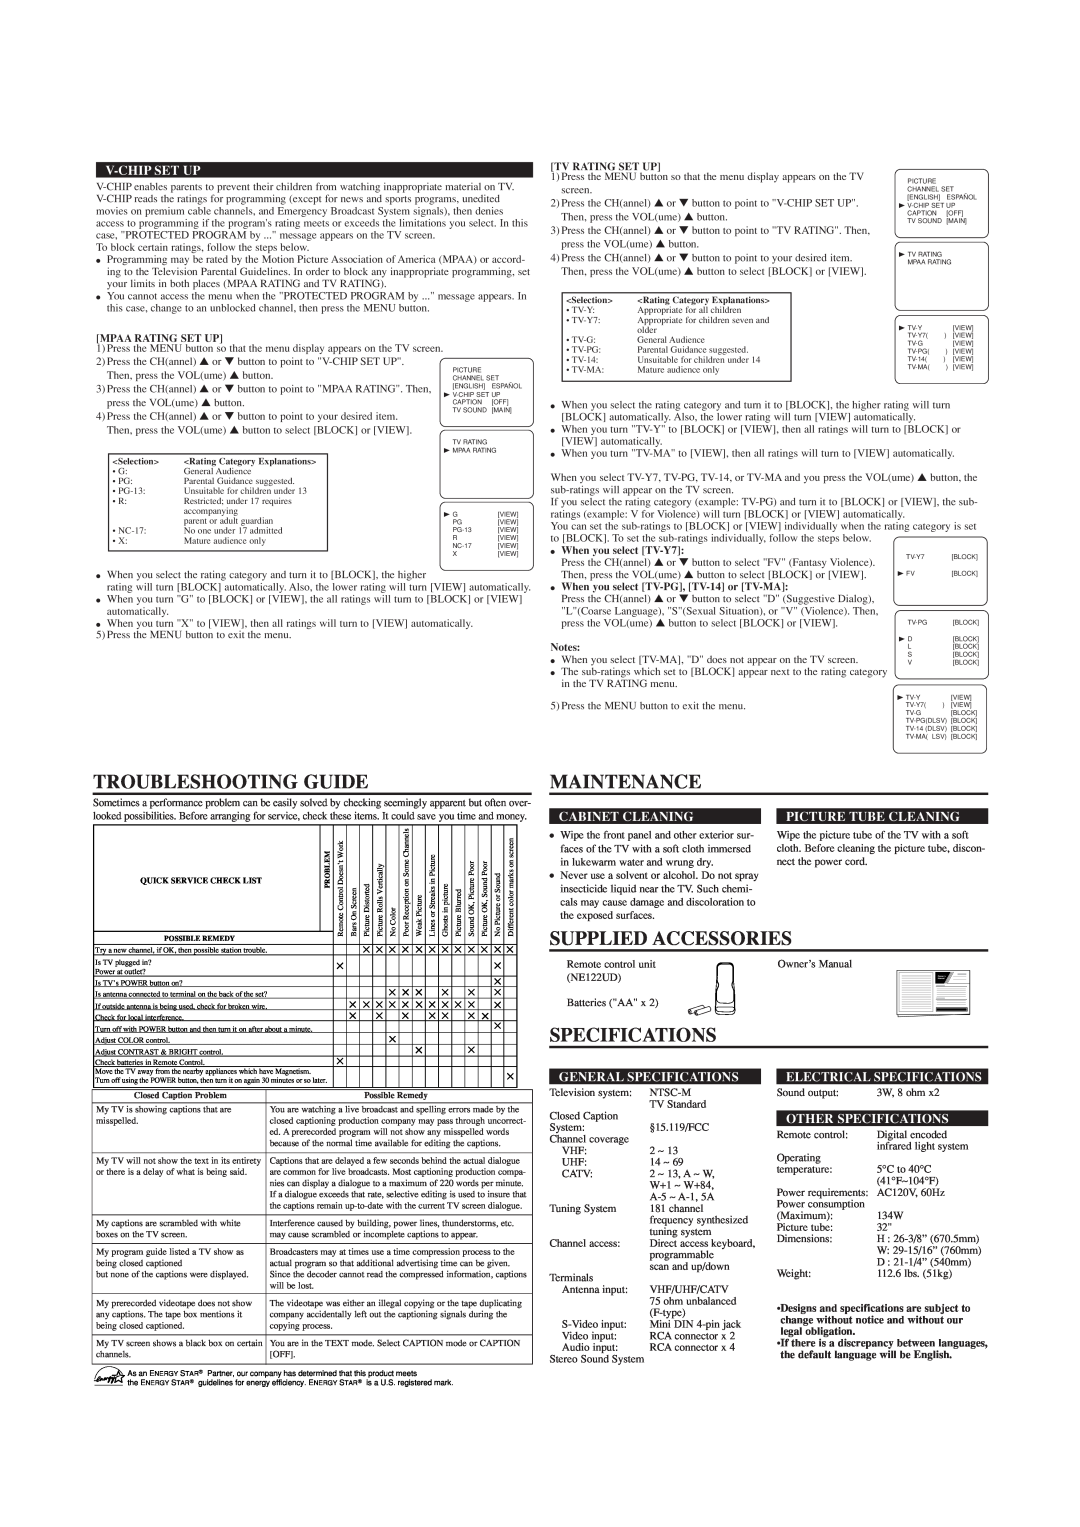 Sylvania SST4323 Troubleshooting Guide, Maintenance, Supplied Accessories, Specifications, V-Chip Set Up, Cabinet Cleaning 